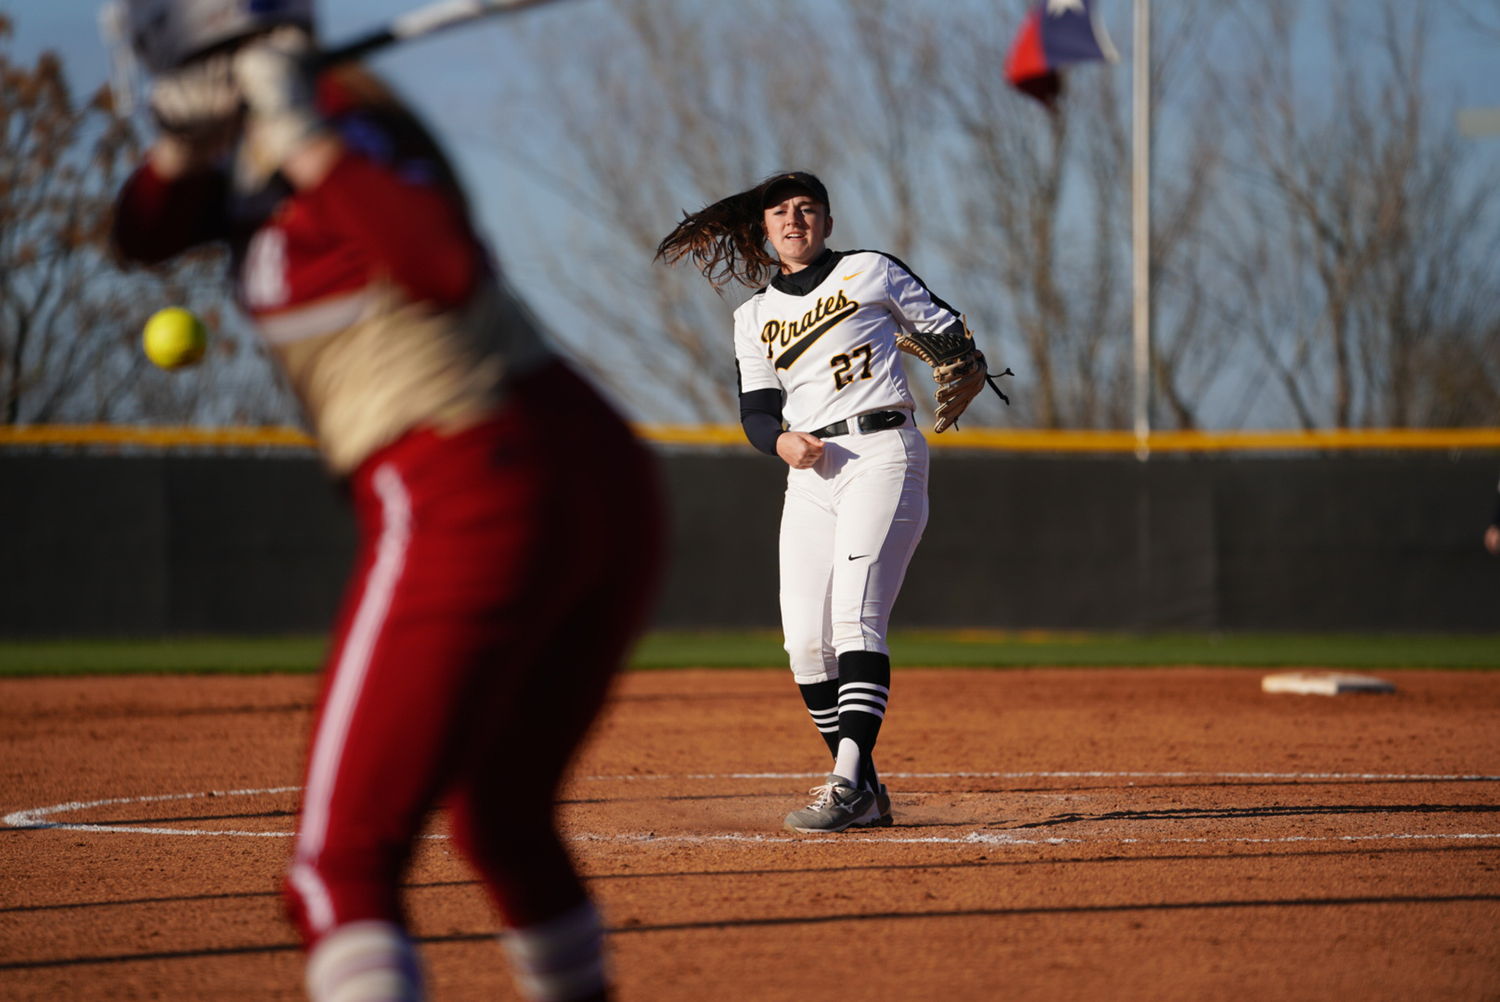 Southwestern University Pirates pitcher Lindsey Longuet, in the center of the picture, delivers a pitch against an Austin College left-handed batter, pictured to the left. 